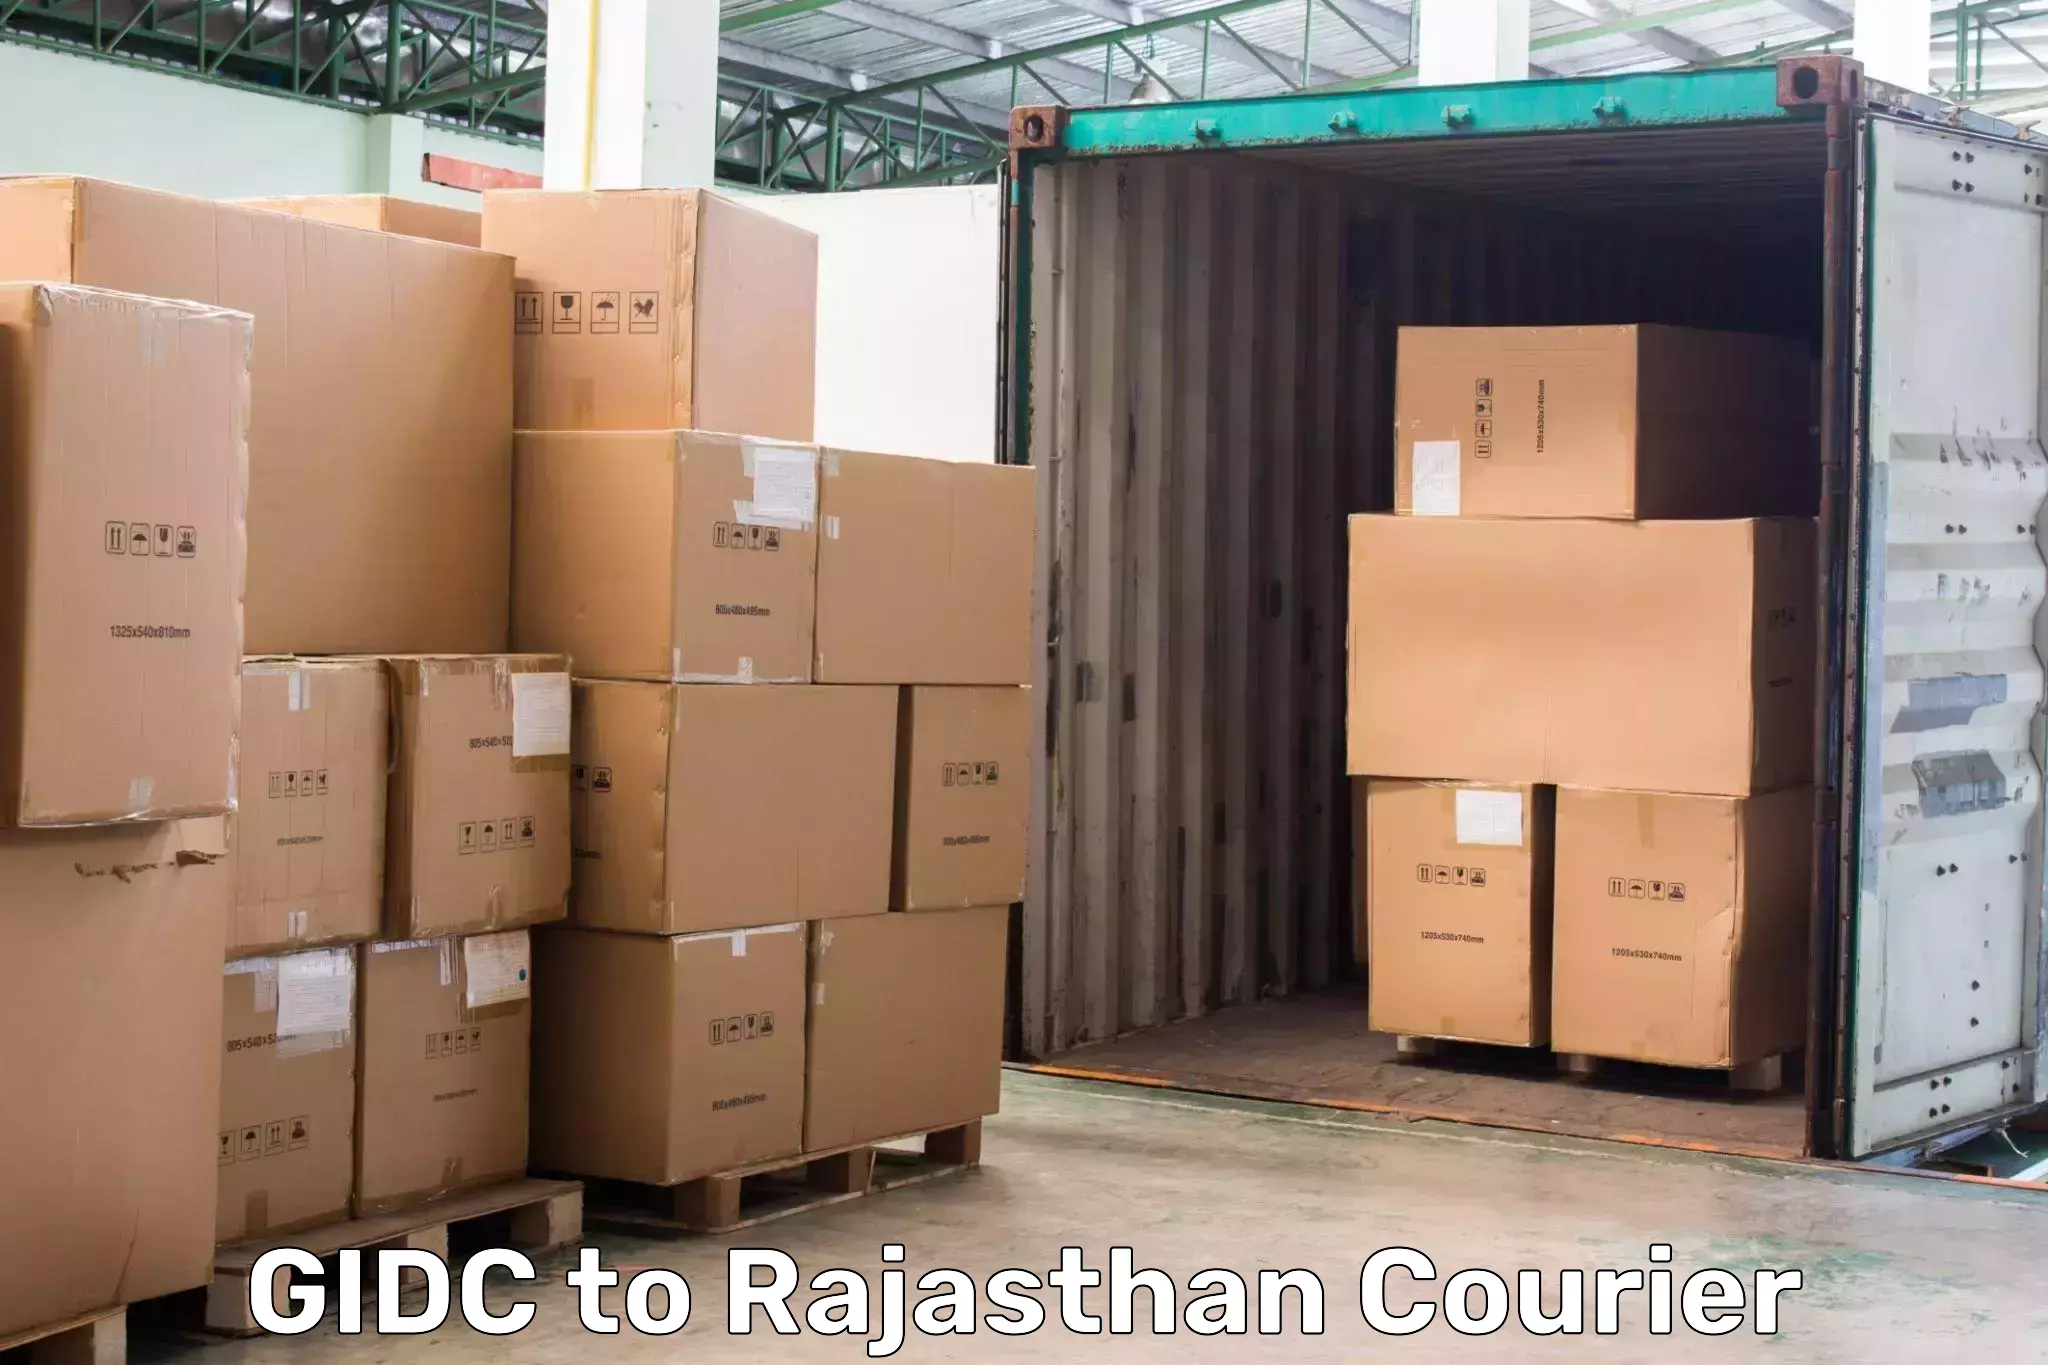 High-speed parcel service GIDC to Rajasthan